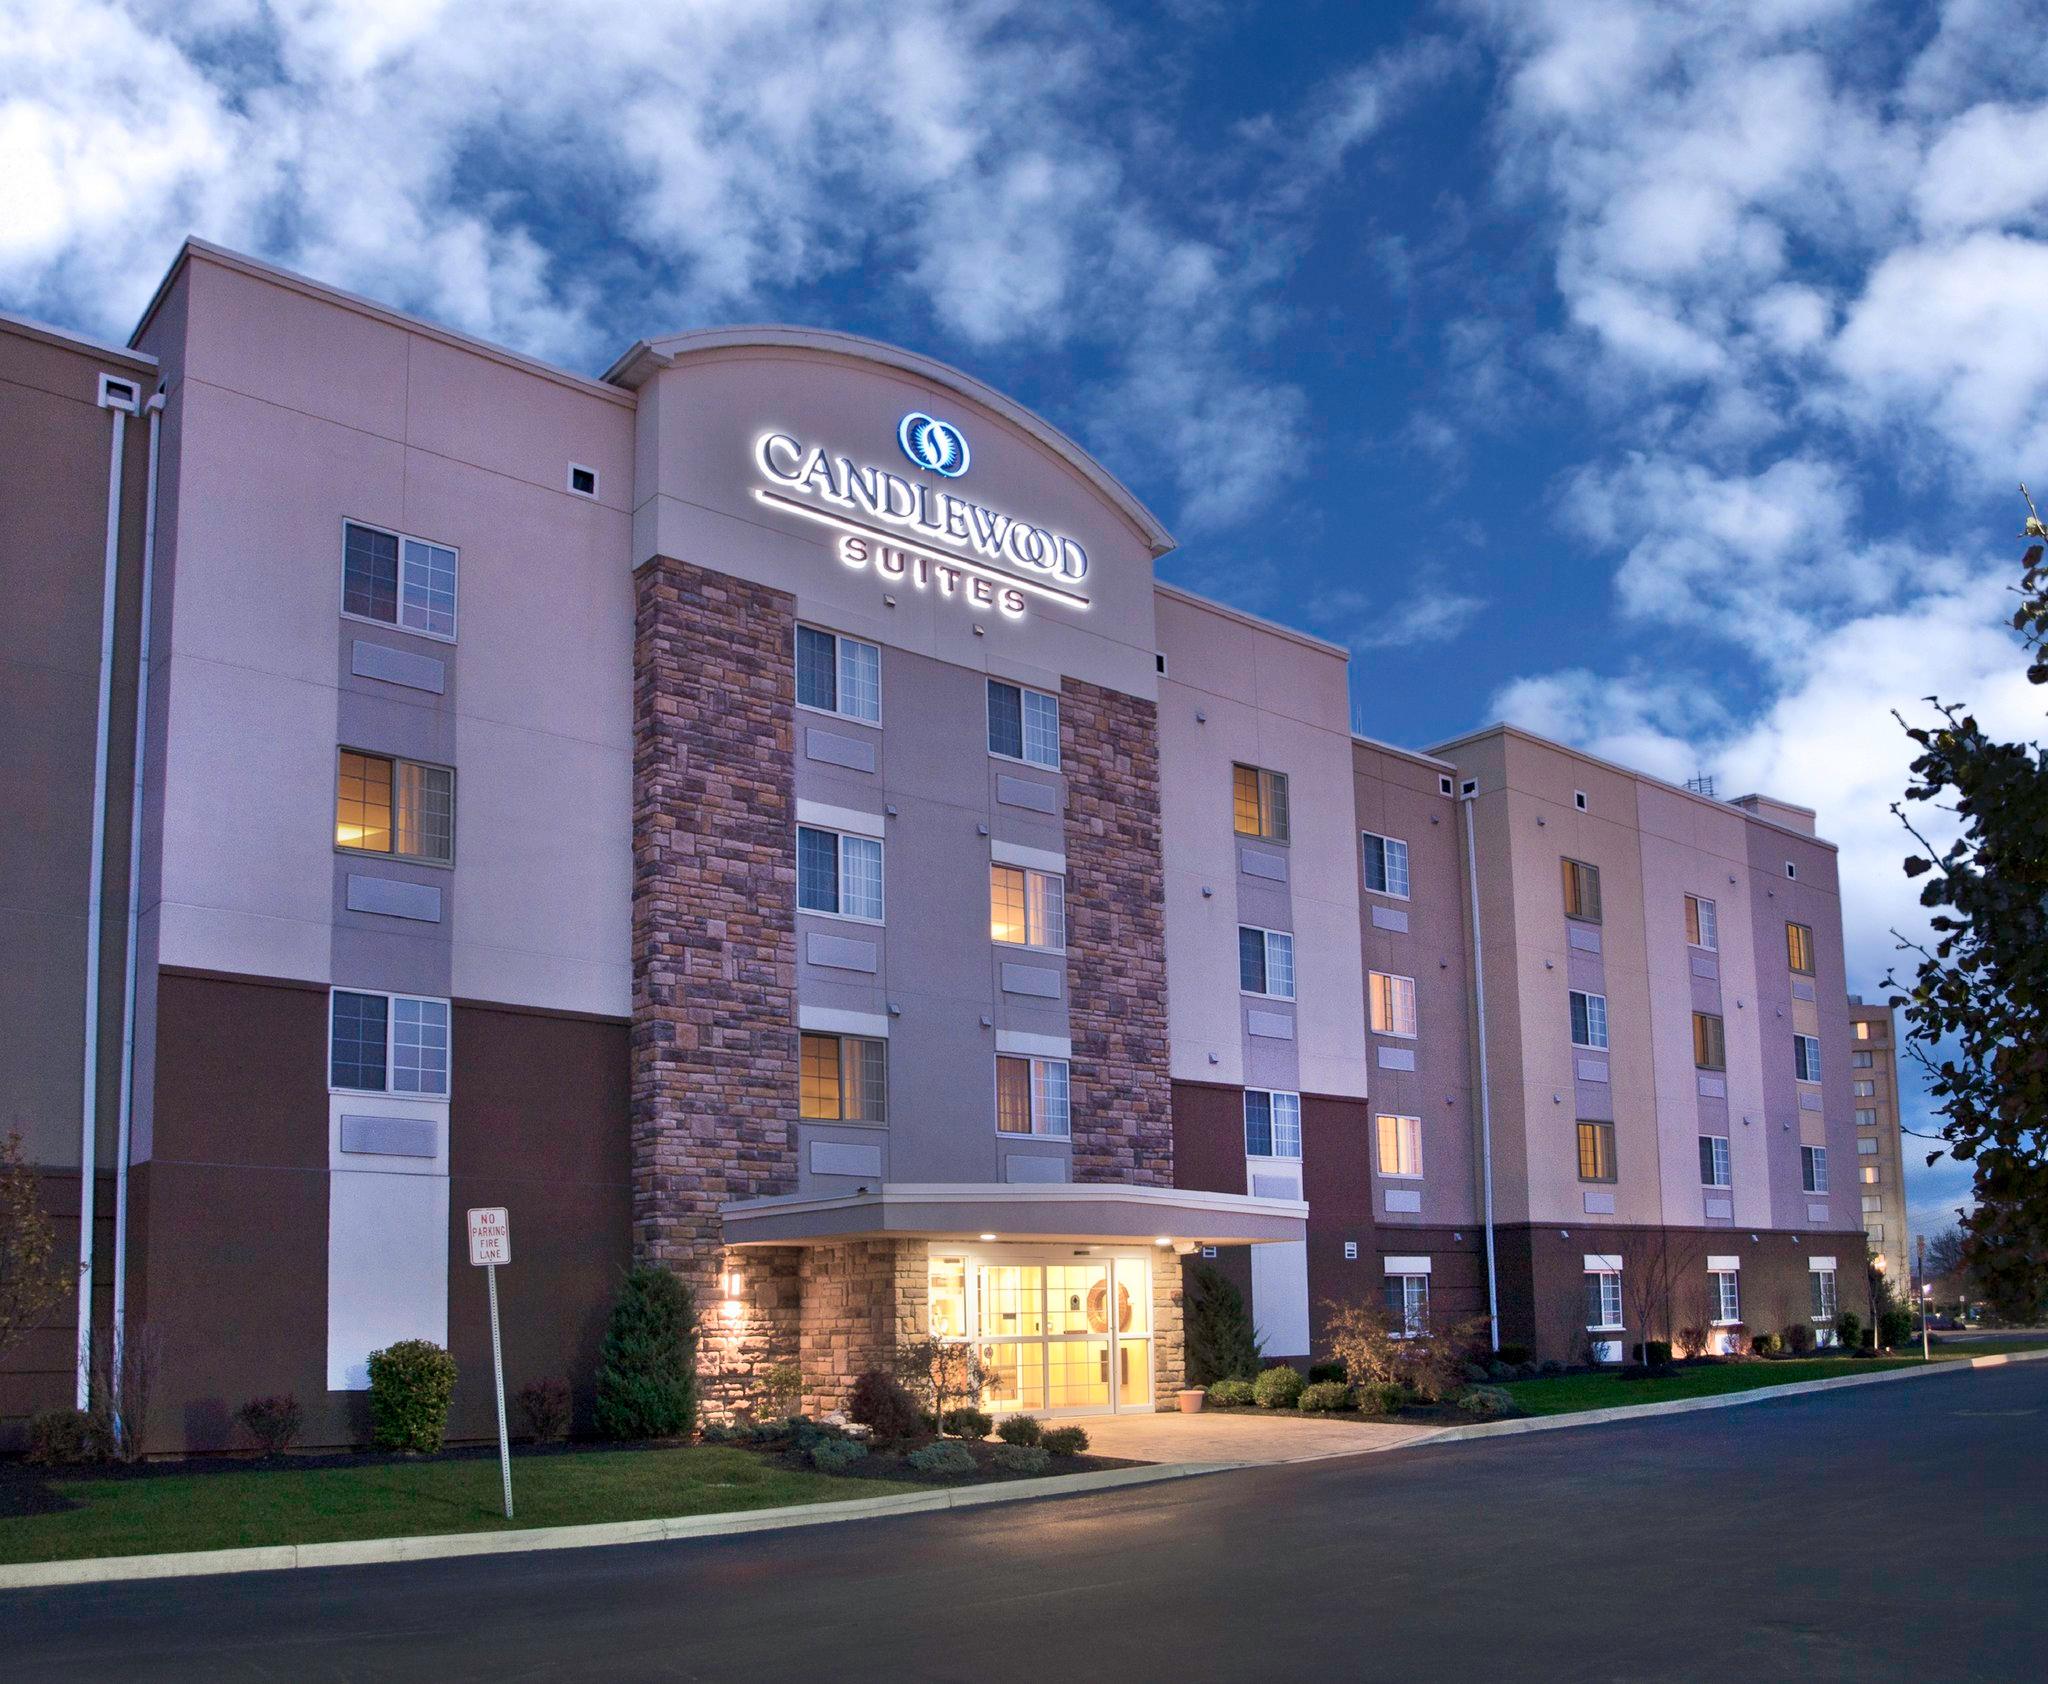 Candlewood Suites Buffalo Amherst in Amherst, NY